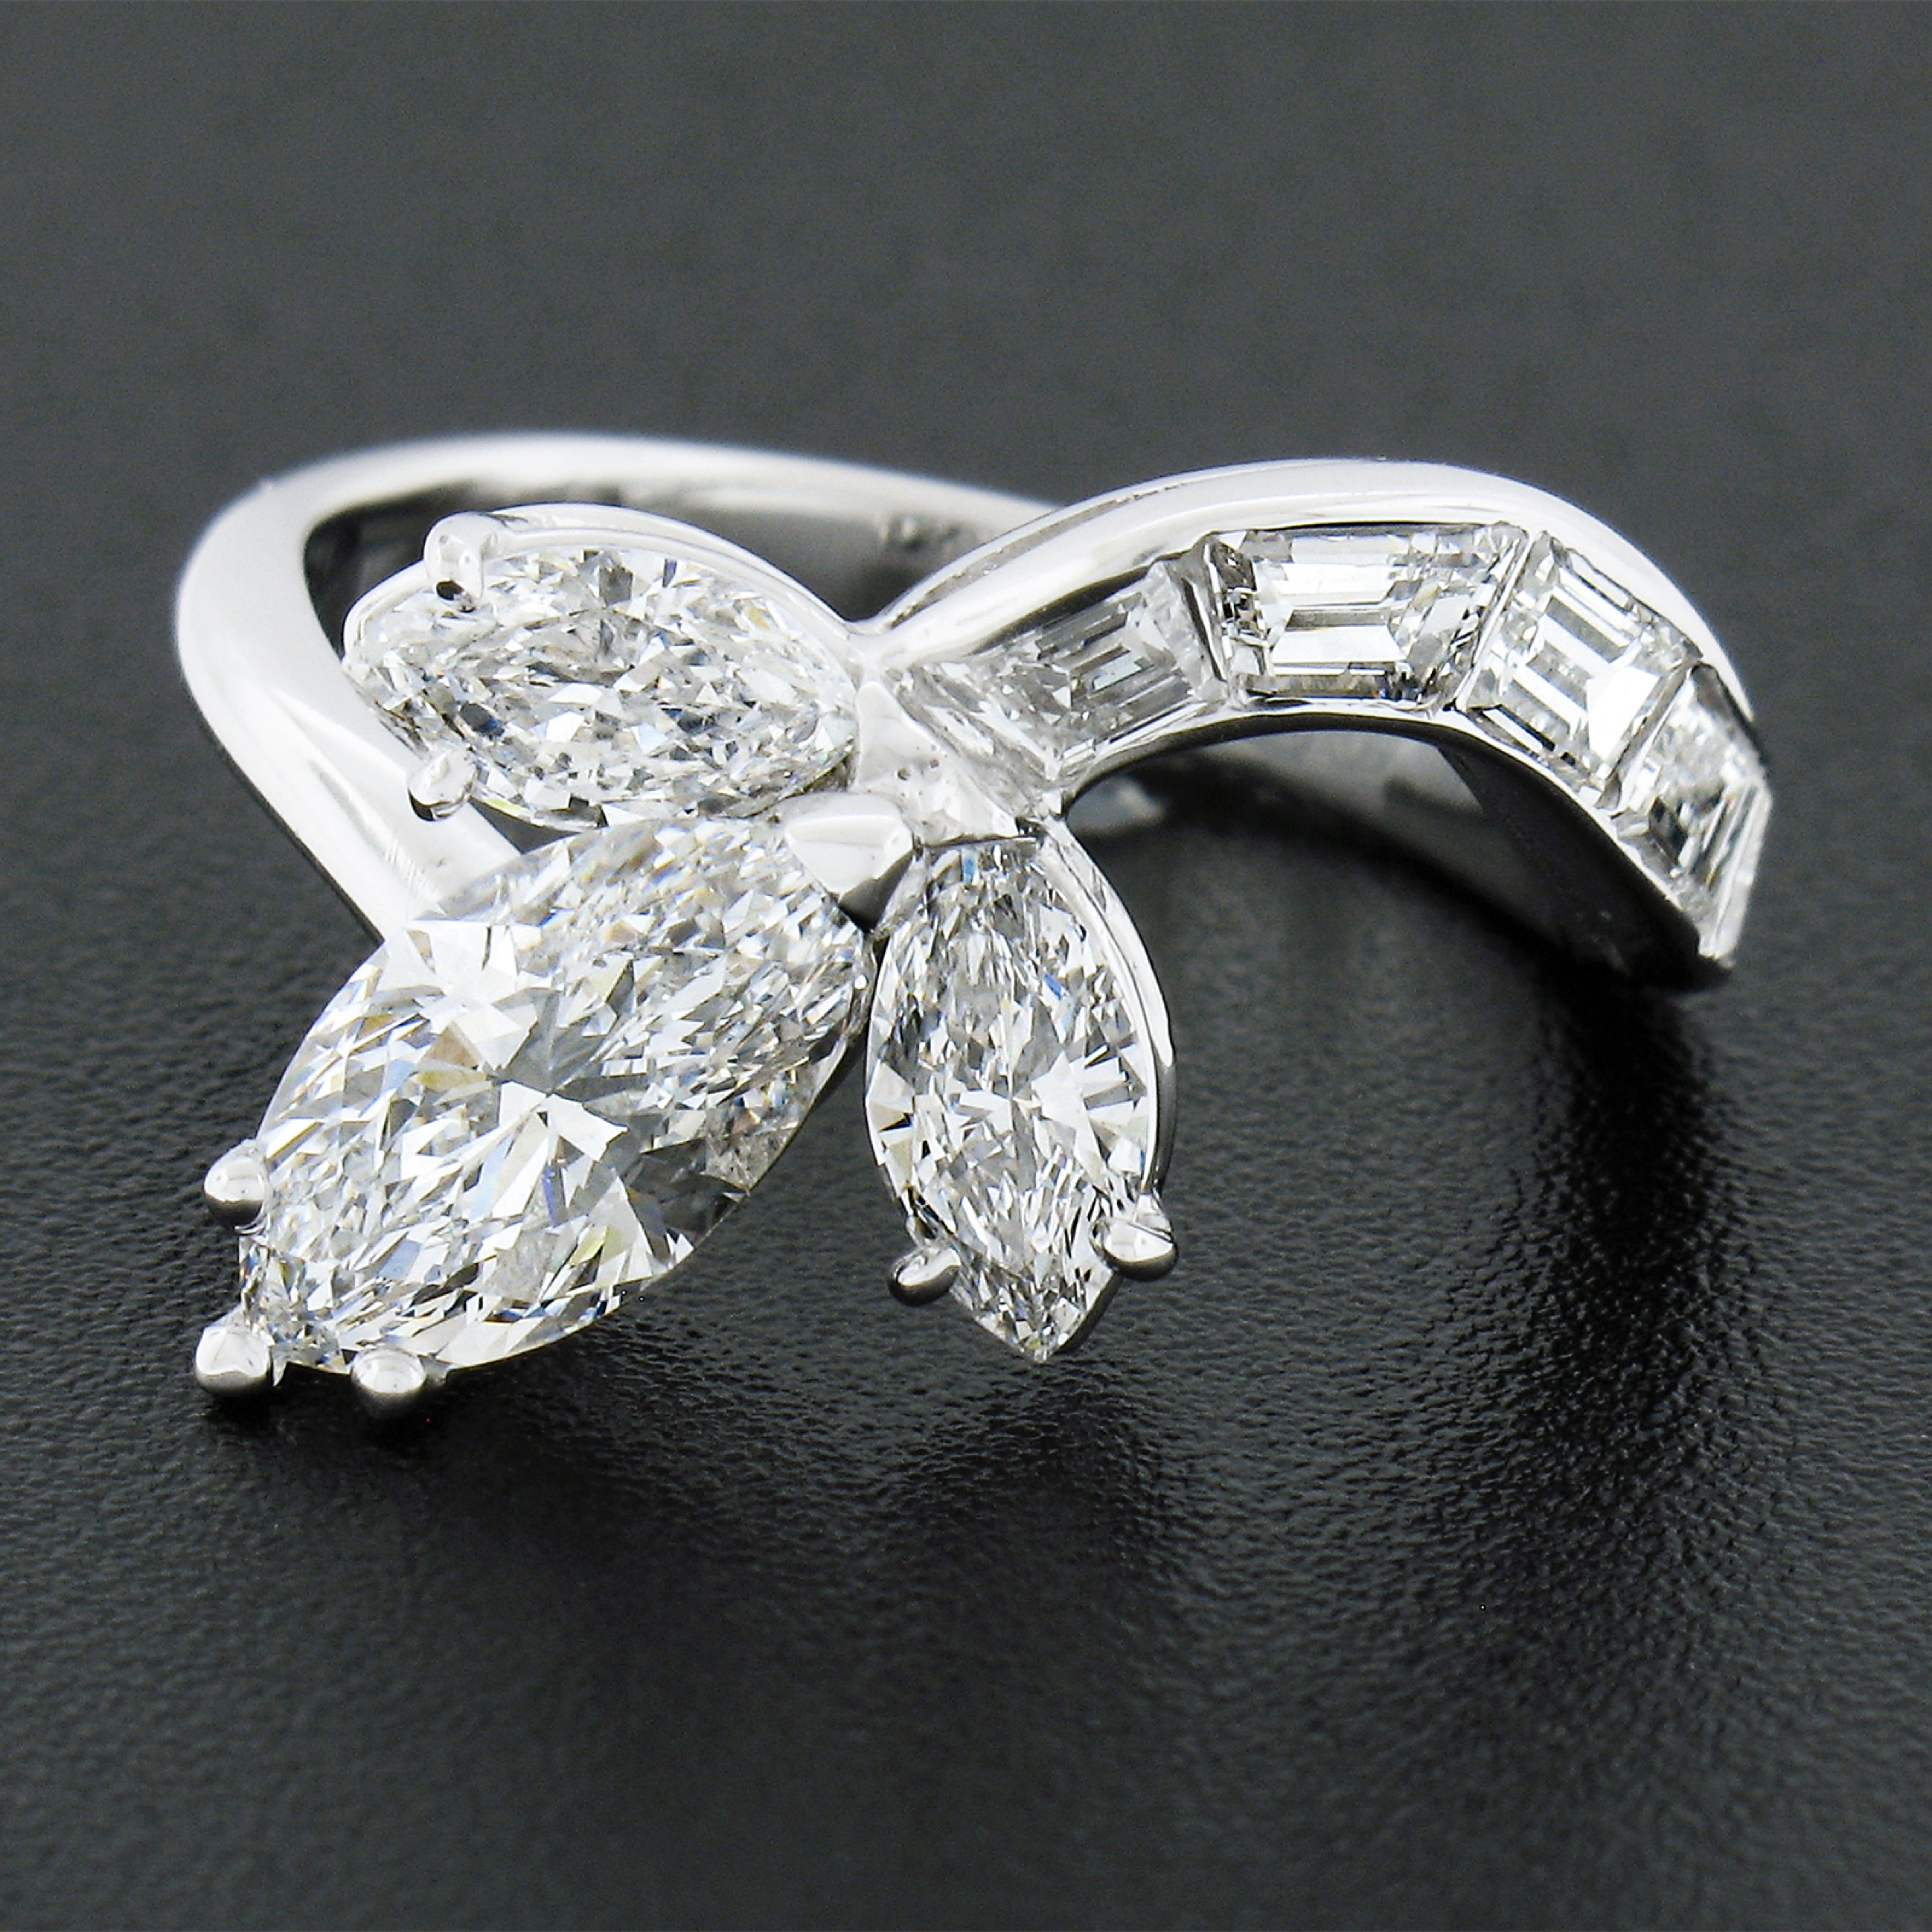 This incredibly chic and uniquely designed vintage diamond ring is crafted in solid platinum and features a breathtaking, GIA certified, marquise brilliant cut diamond neatly prong set on a slightly elevated open basket at the center of the design